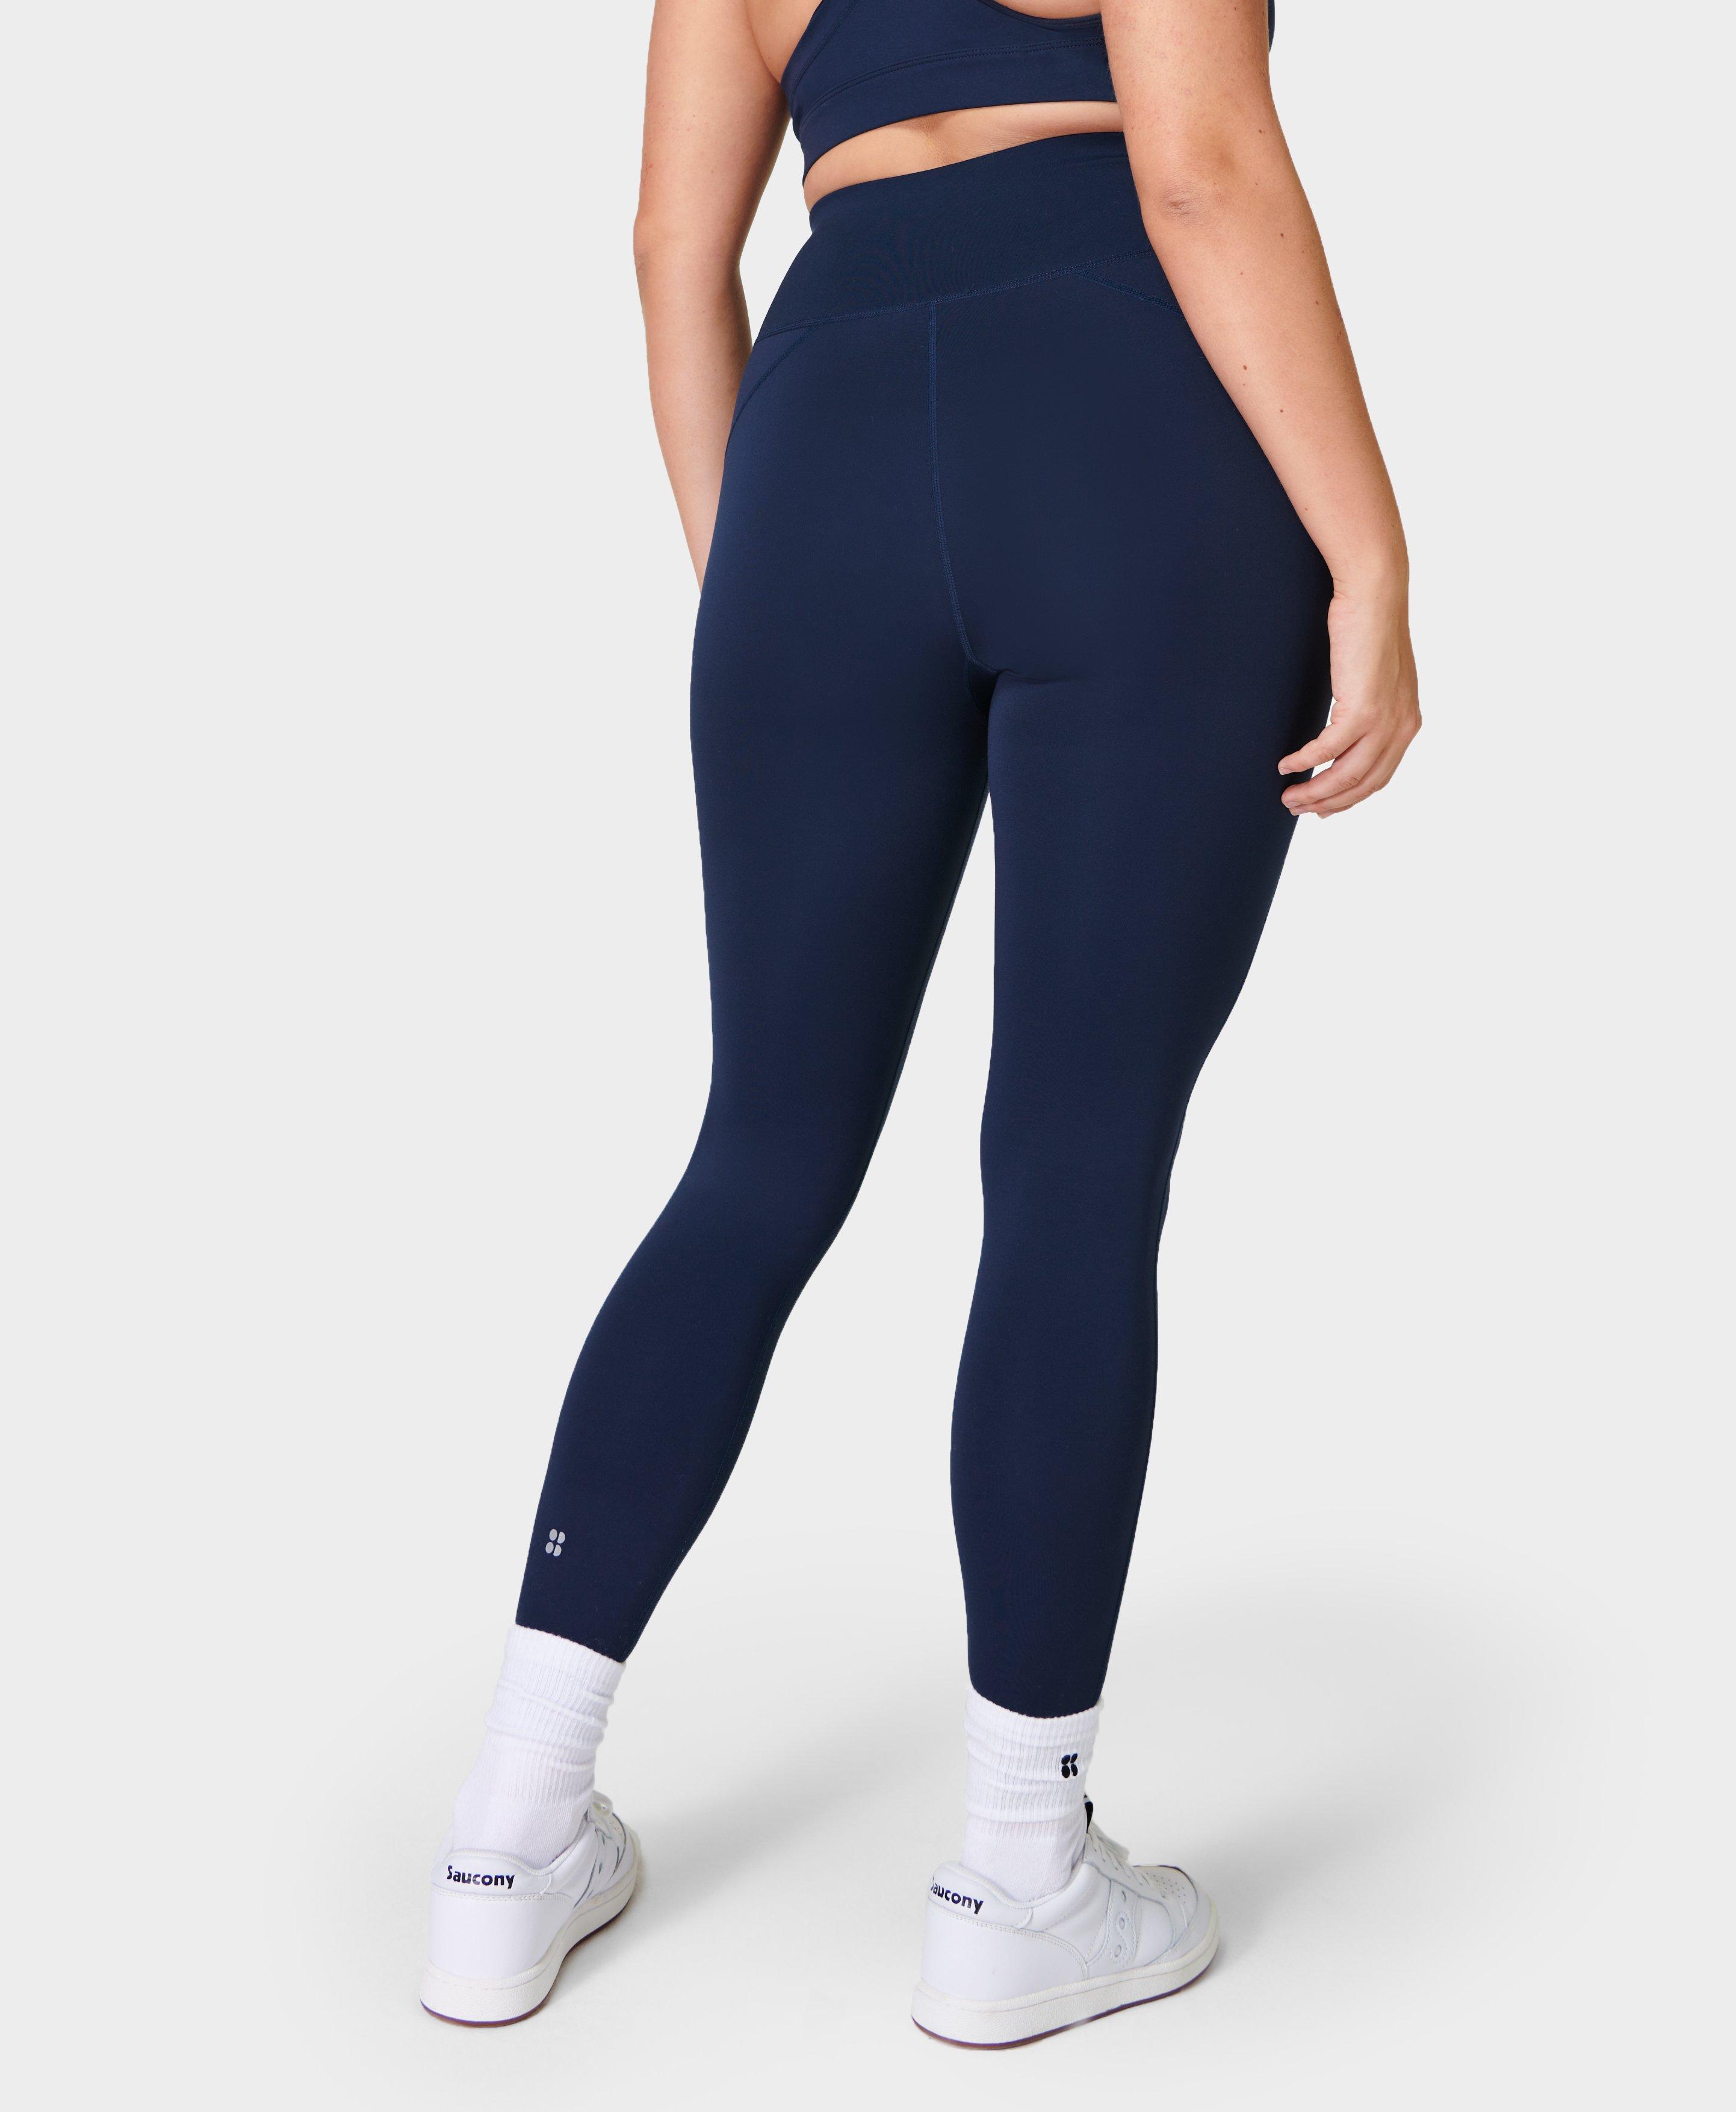 NEW Sweaty Betty All Day Ruched Hem 7/8 Leggings - SB5973A - Navy Blue -  Small